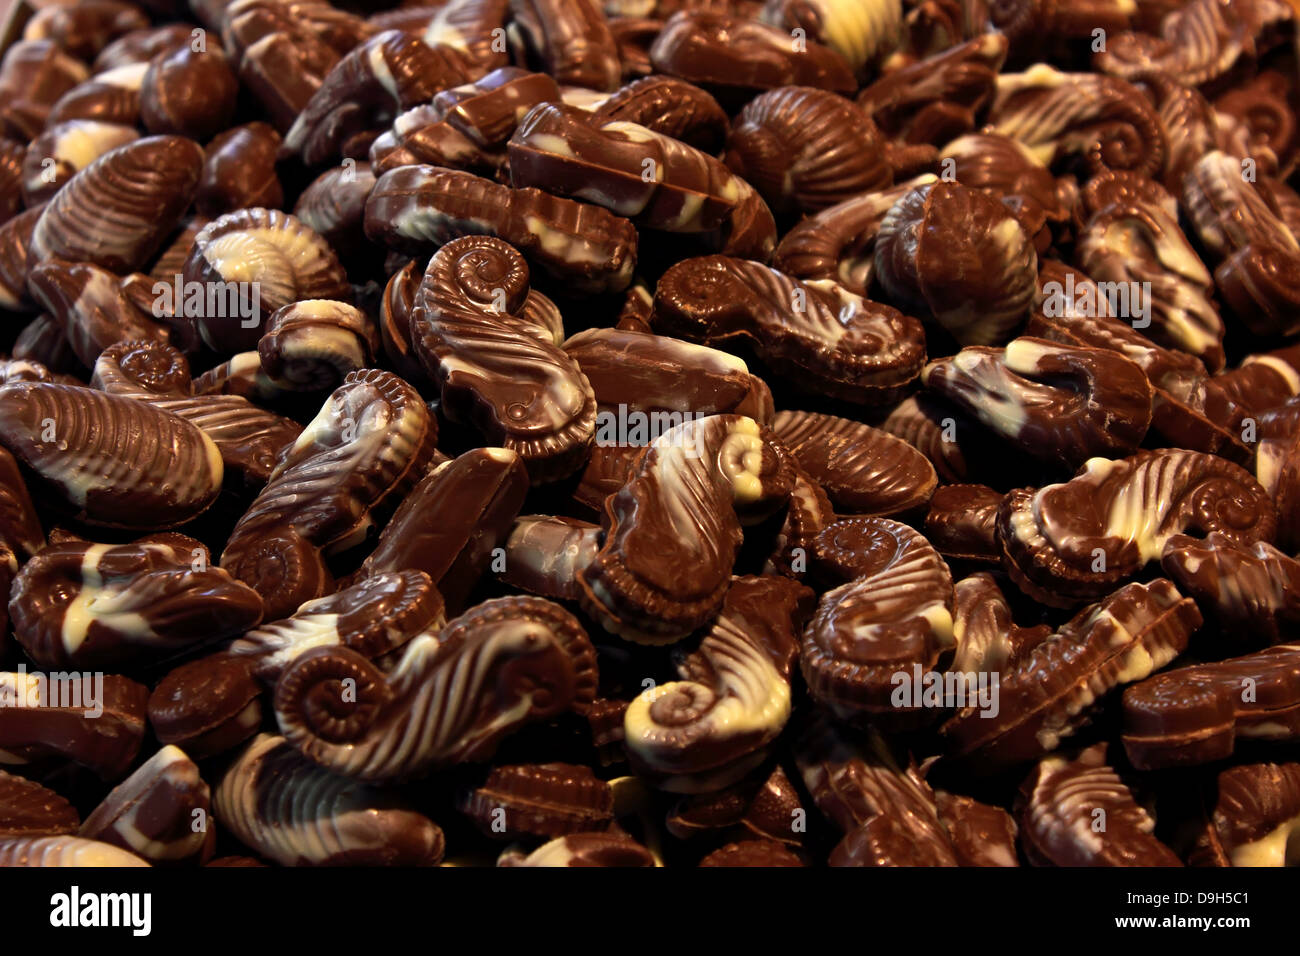 Belgium chocolate theme - sea creatures from chocolate in a choco shop. Stock Photo